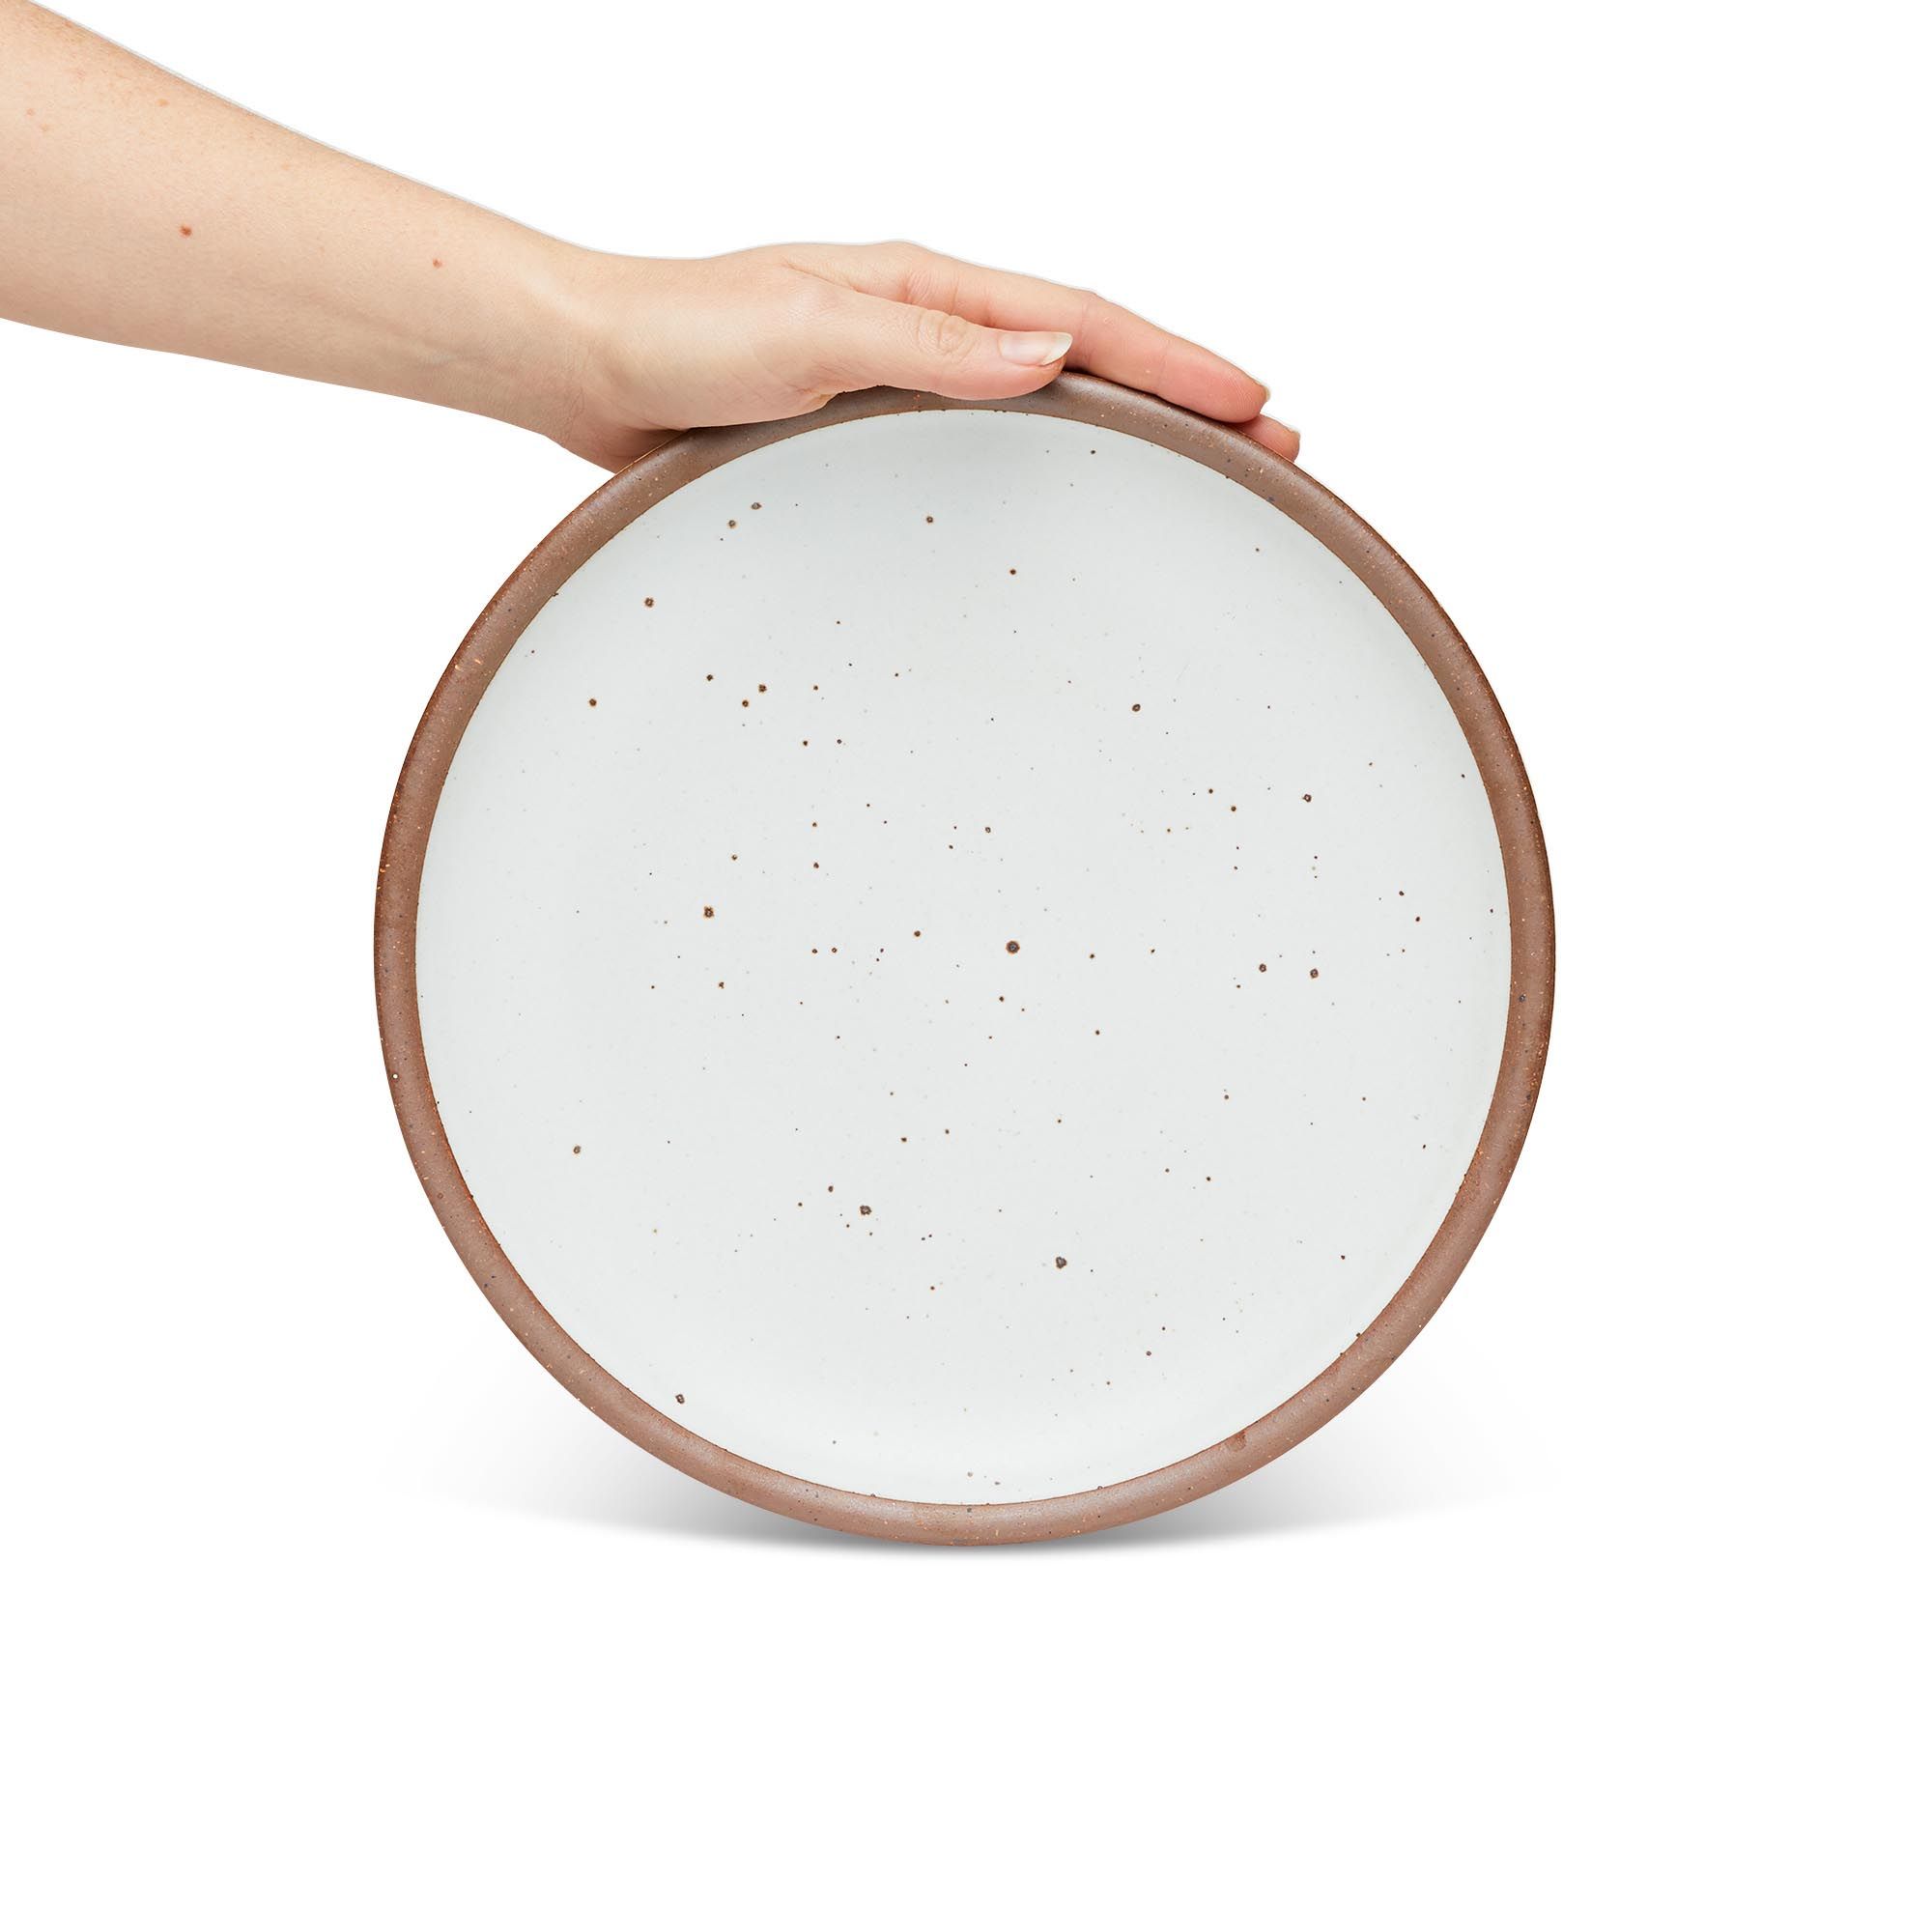 A hand holding a dinner sized ceramic plate in a cool white color featuring iron speckles and an unglazed rim.